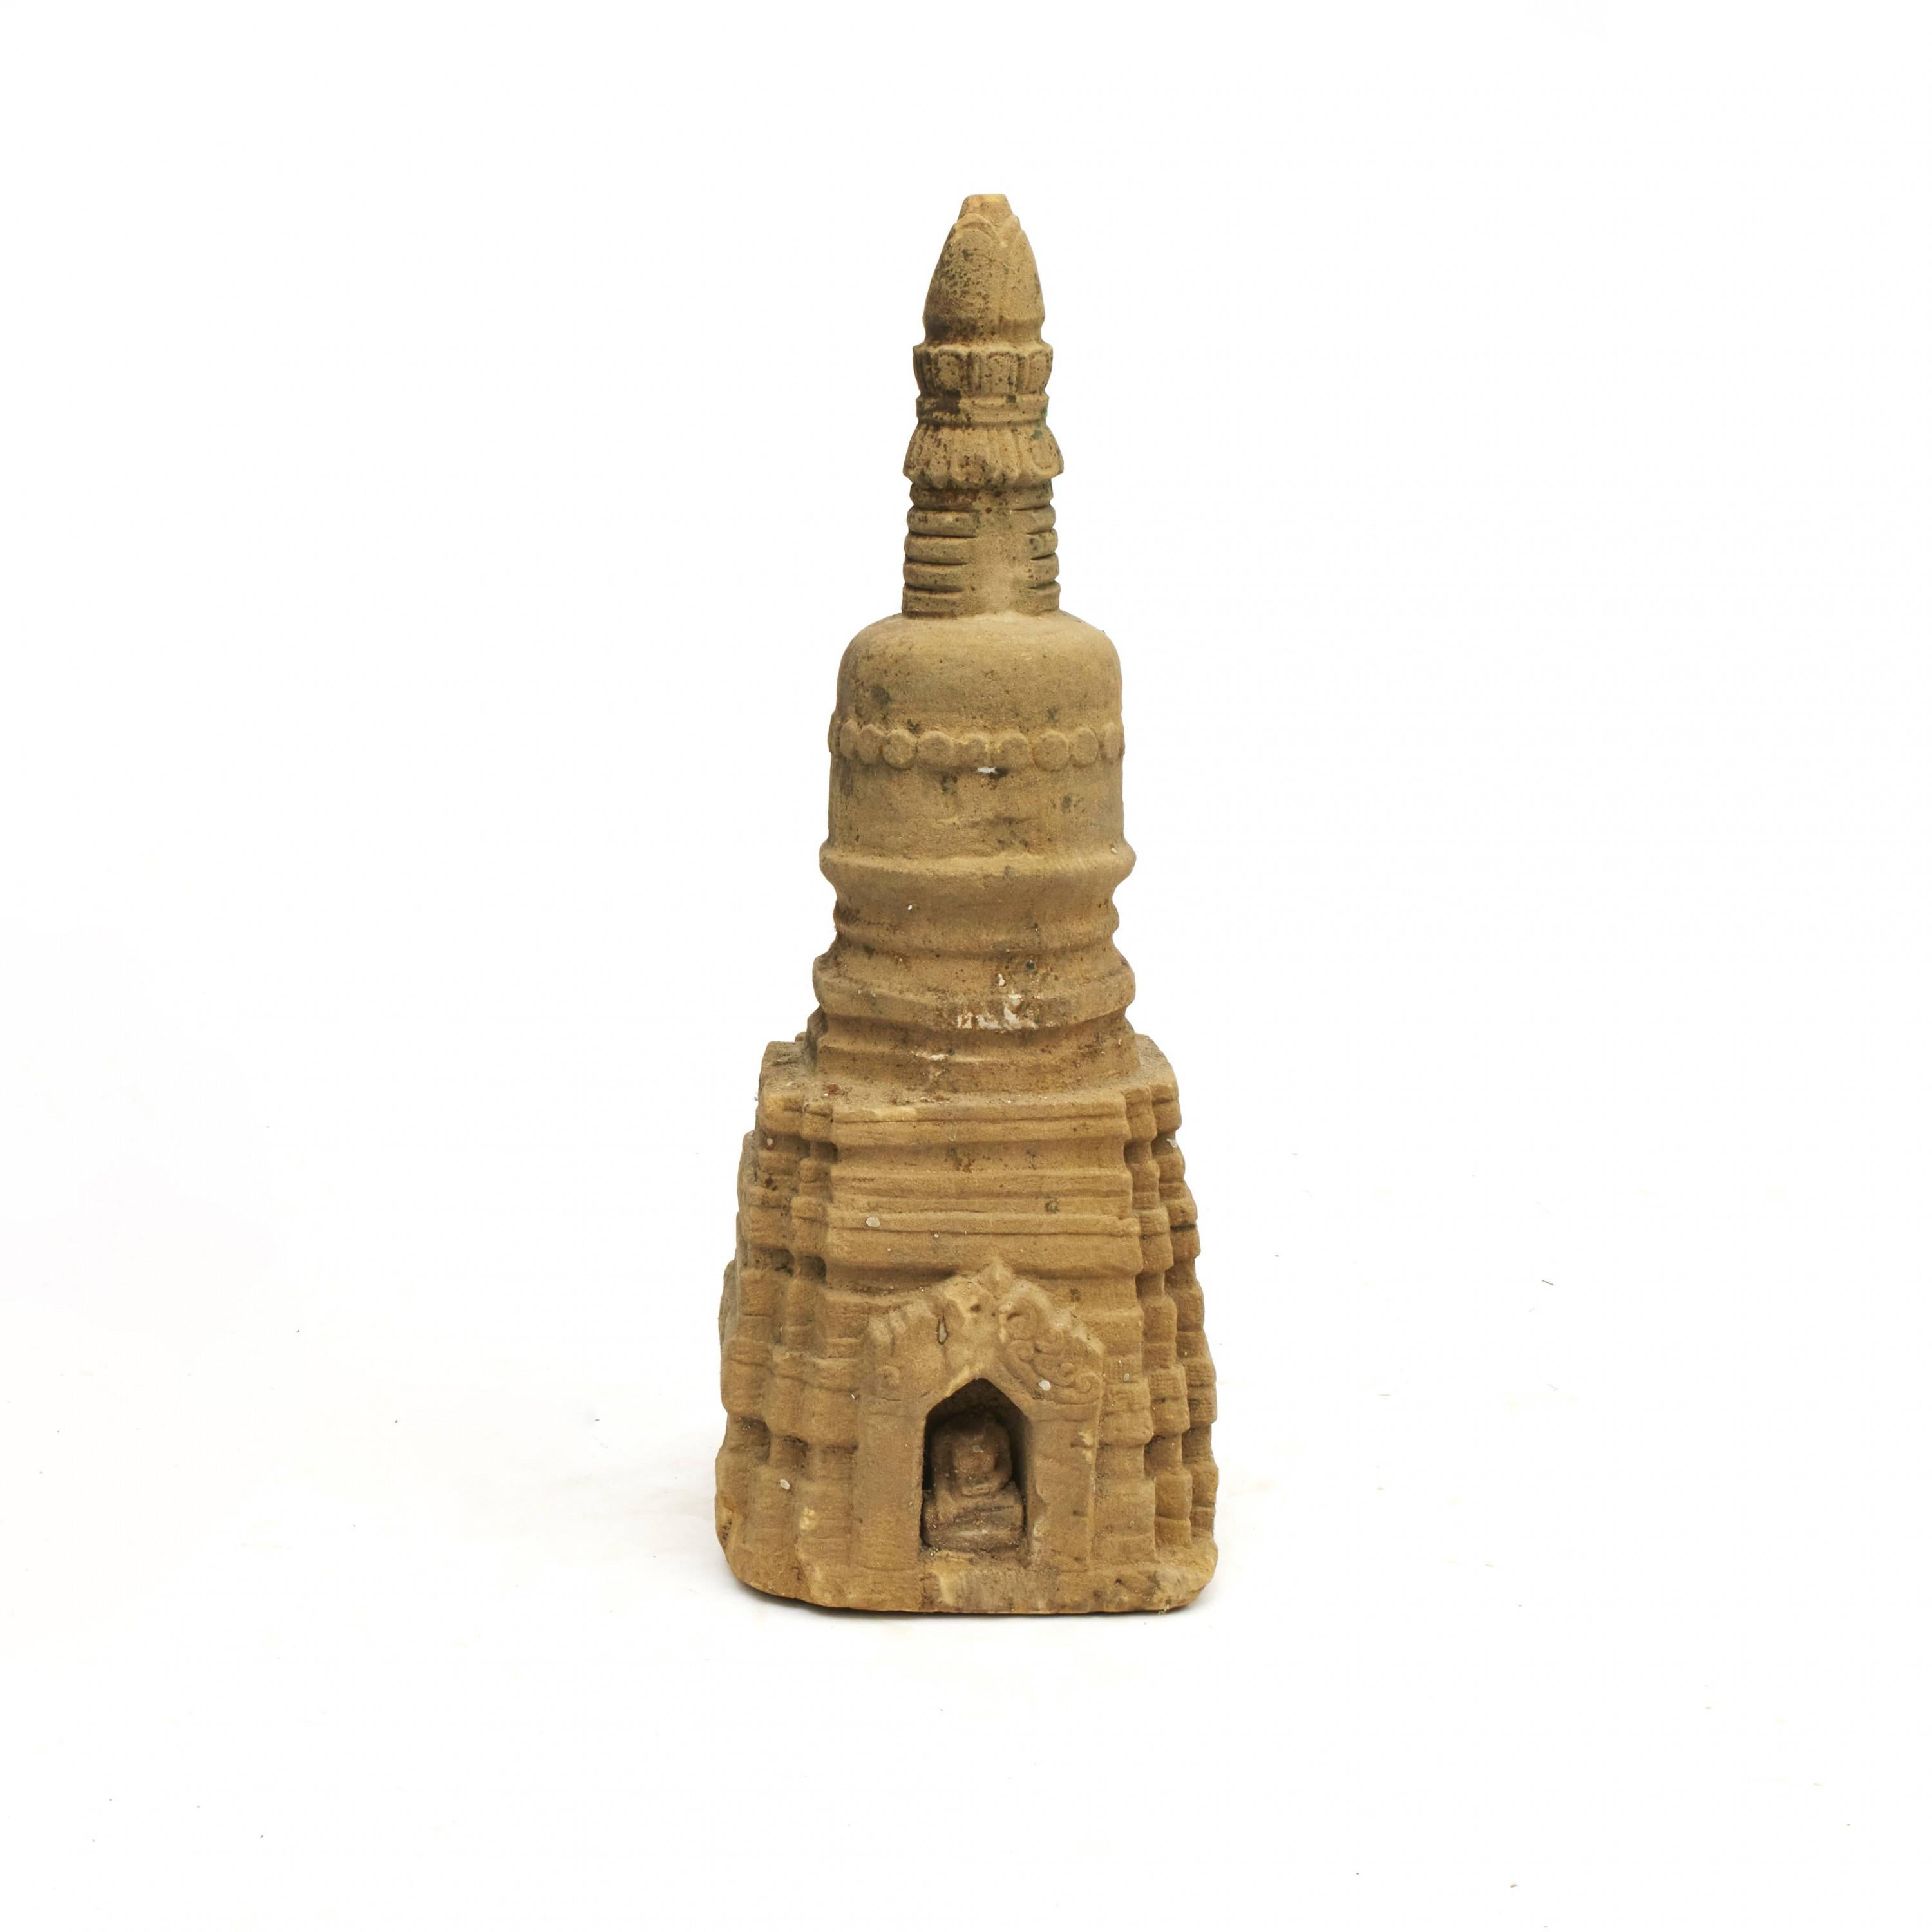 Rare stupa sculpture, 400-600 years old, carved in sandstone. In original untouched, well-preserved condition. From Arakan in Burma.
Typical stupa construction with square base, hemispherical dome and conical spire.
At the base a portal door with